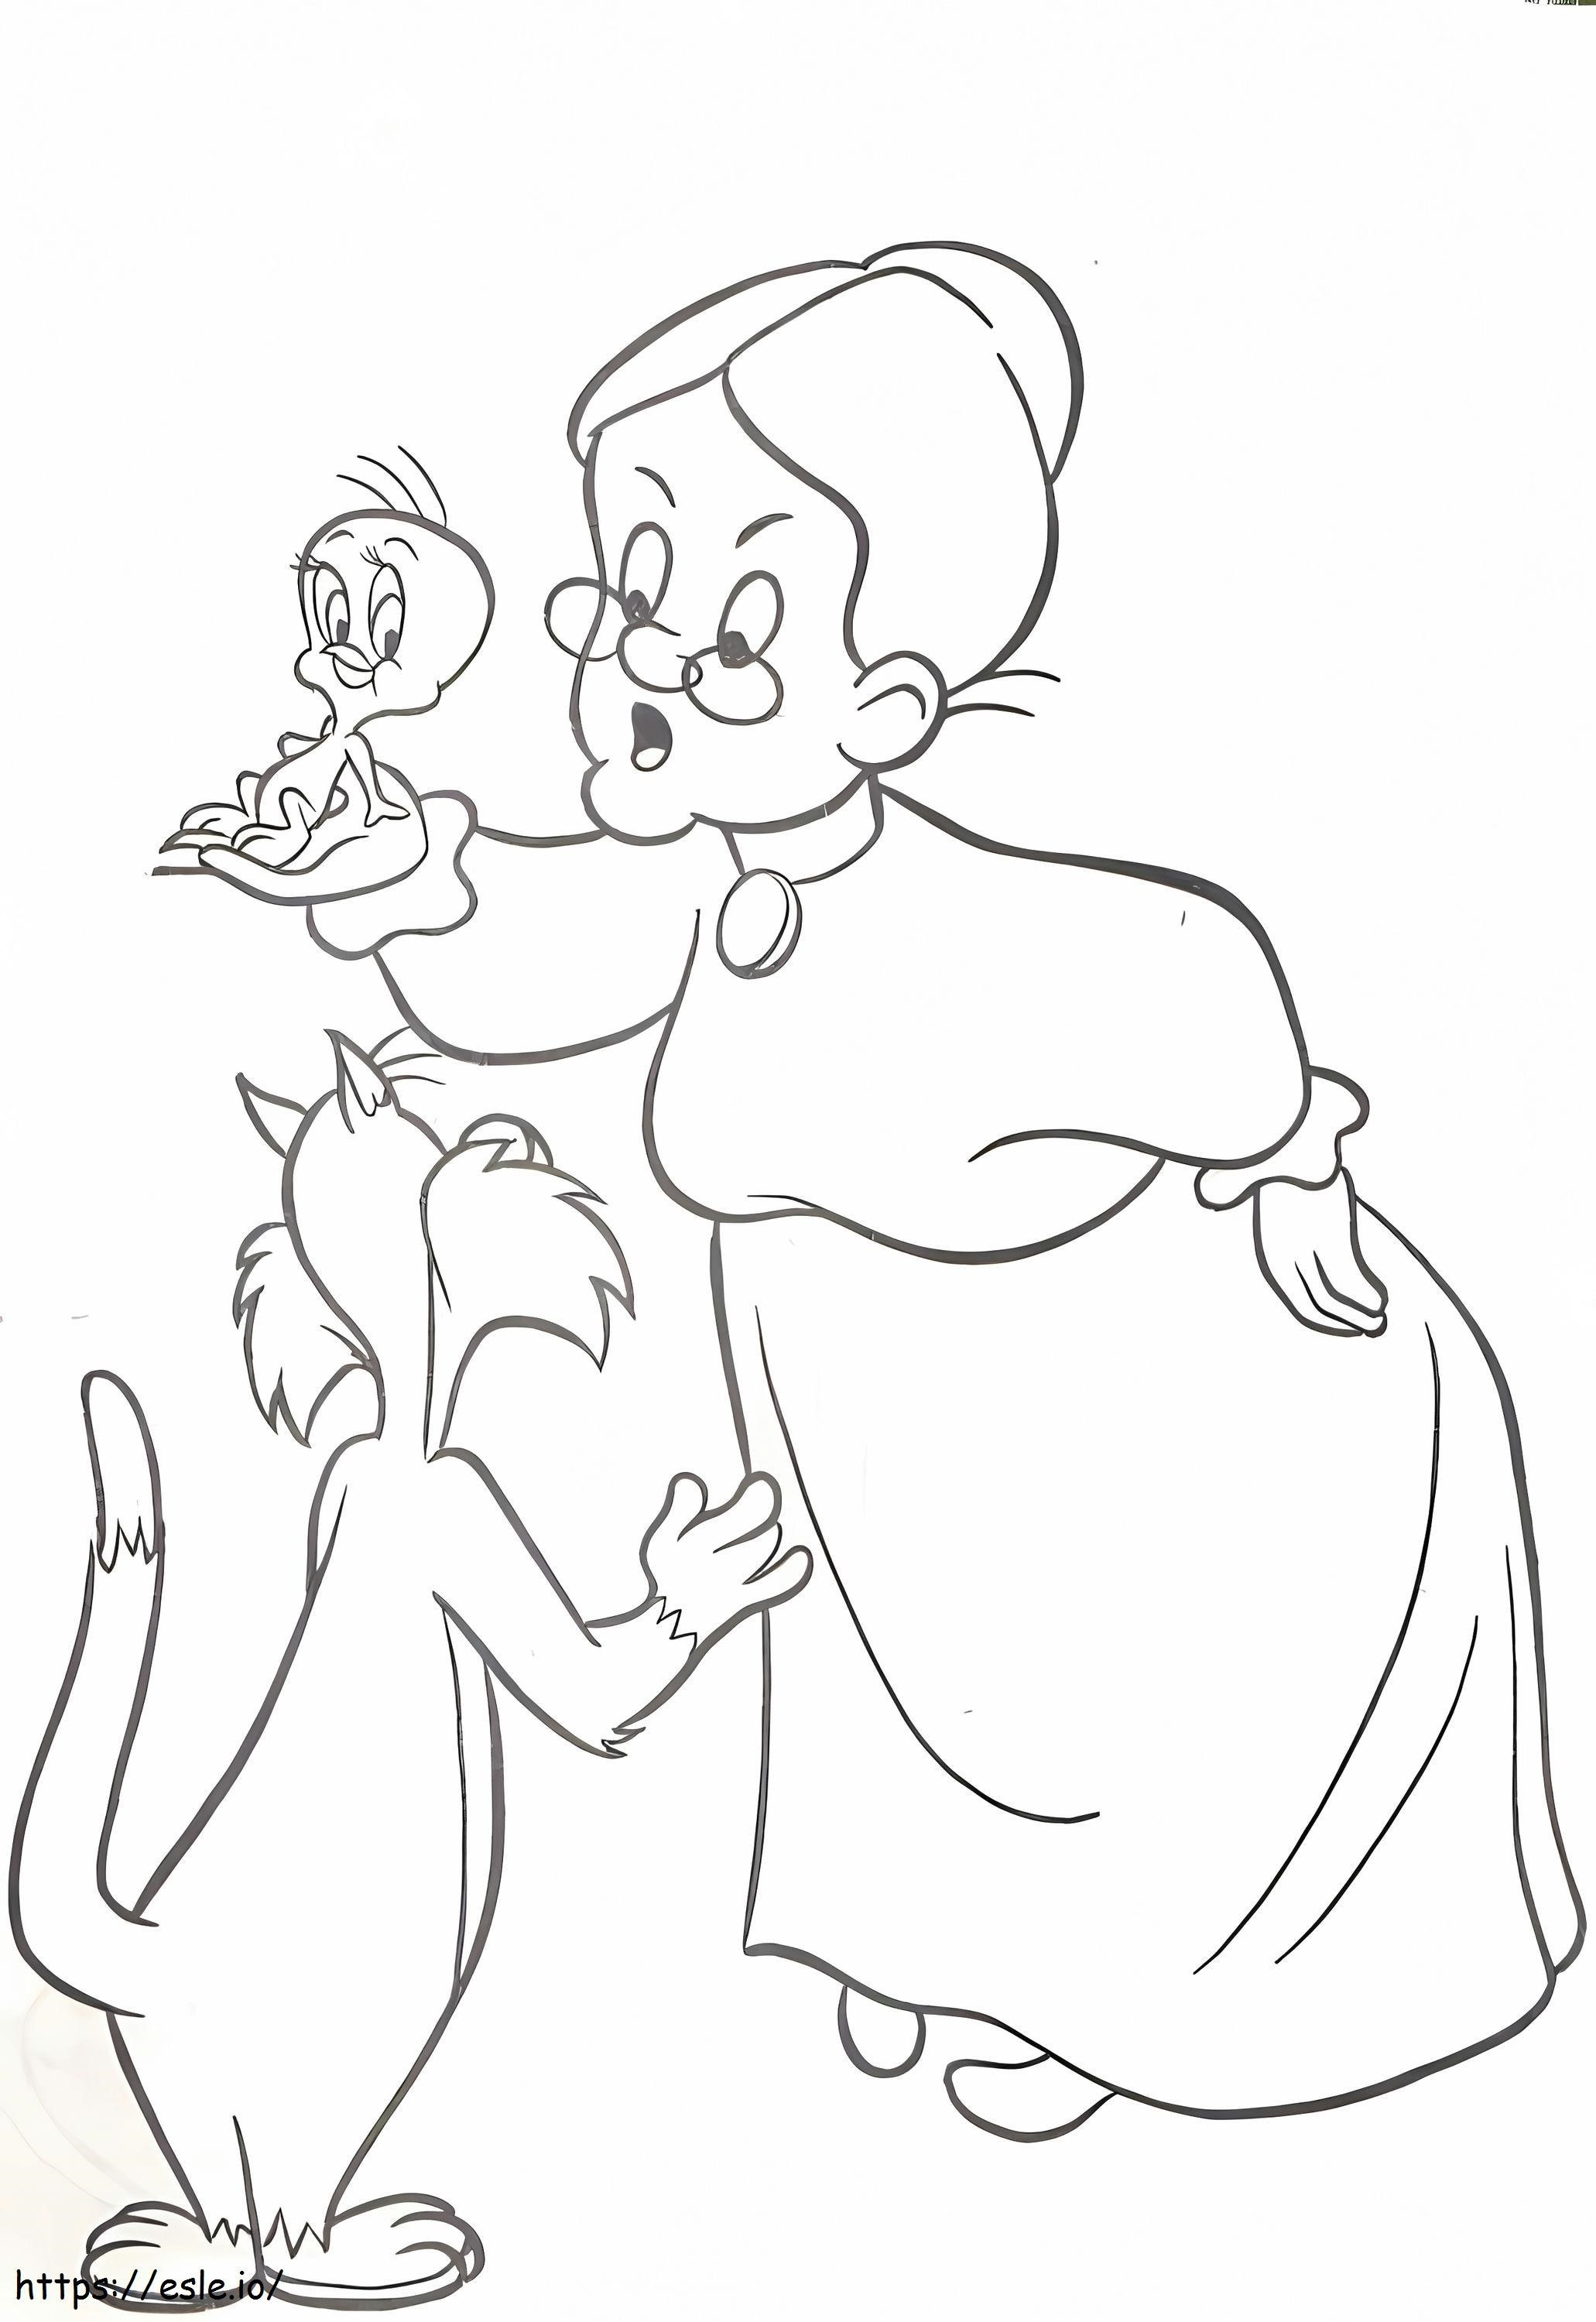 Sylvester And Granny coloring page